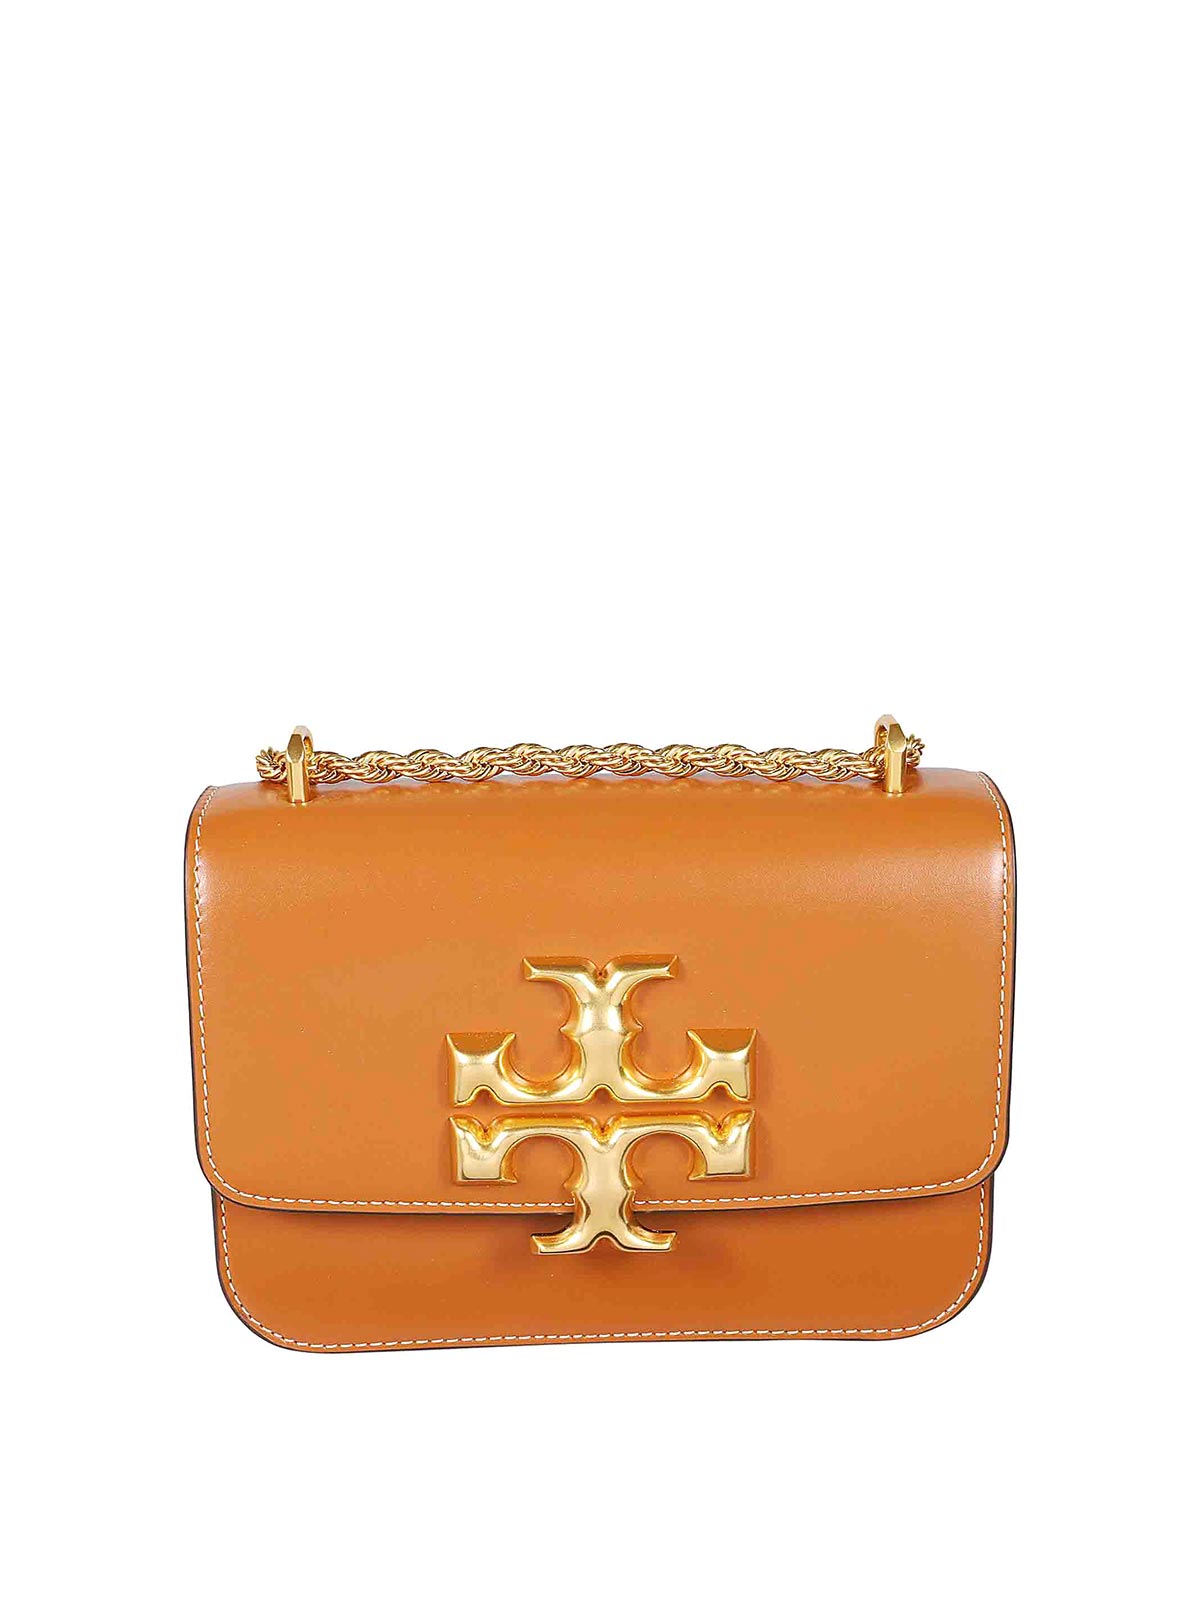 Tory Burch Eleanor Leather Bag In Gold